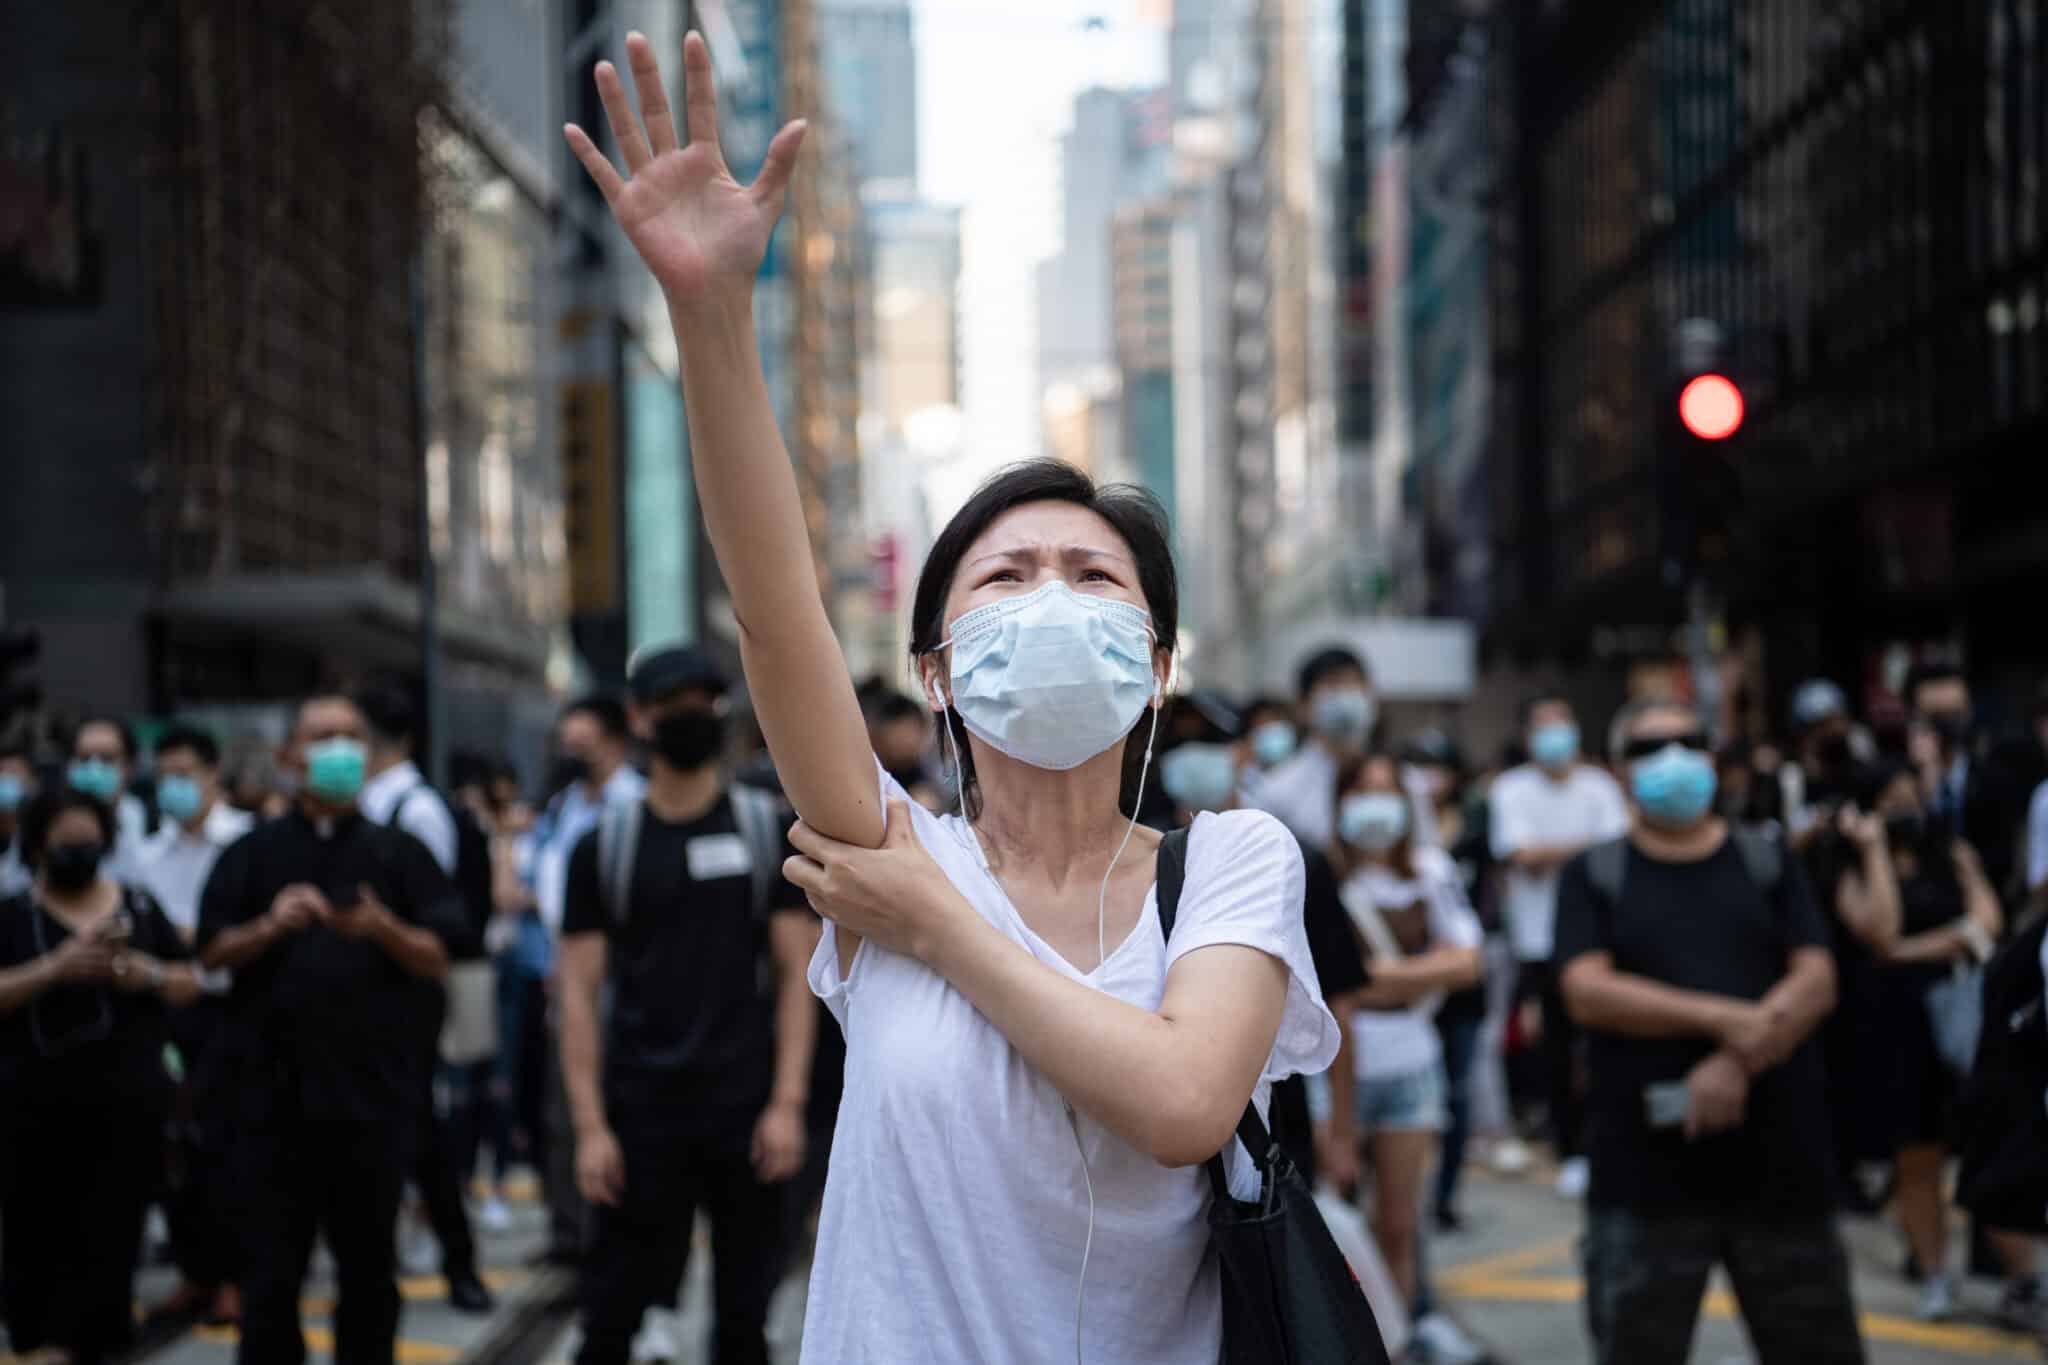 HONG KONG, CHINA - OCTOBER 4: People protest a government ban on face masks in Central on October 4, 2019 in Hong Kong, China. Hong Kong's government invoked emergency powers on Friday to introduce an anti-mask law which bans people from wearing masks at public assemblies as the city remains on edge with the anti-government movement entering its fourth month. Pro-democracy protesters marked the 70th anniversary of the founding of the People's Republic of China in Hong Kong as one student protester was shot in the chest in the Tsuen Wan district during with mass demonstrations across Hong Kong. Protesters in Hong Kong continue to call for Chief Executive Carrie Lam to meet their remaining demands since the controversial extradition bill was withdrawn, which includes an independent inquiry into police brutality, the retraction of the word riot to describe the rallies, and genuine universal suffrage, as the territory faces a leadership crisis. (Photo by Laurel Chor/Getty Images)